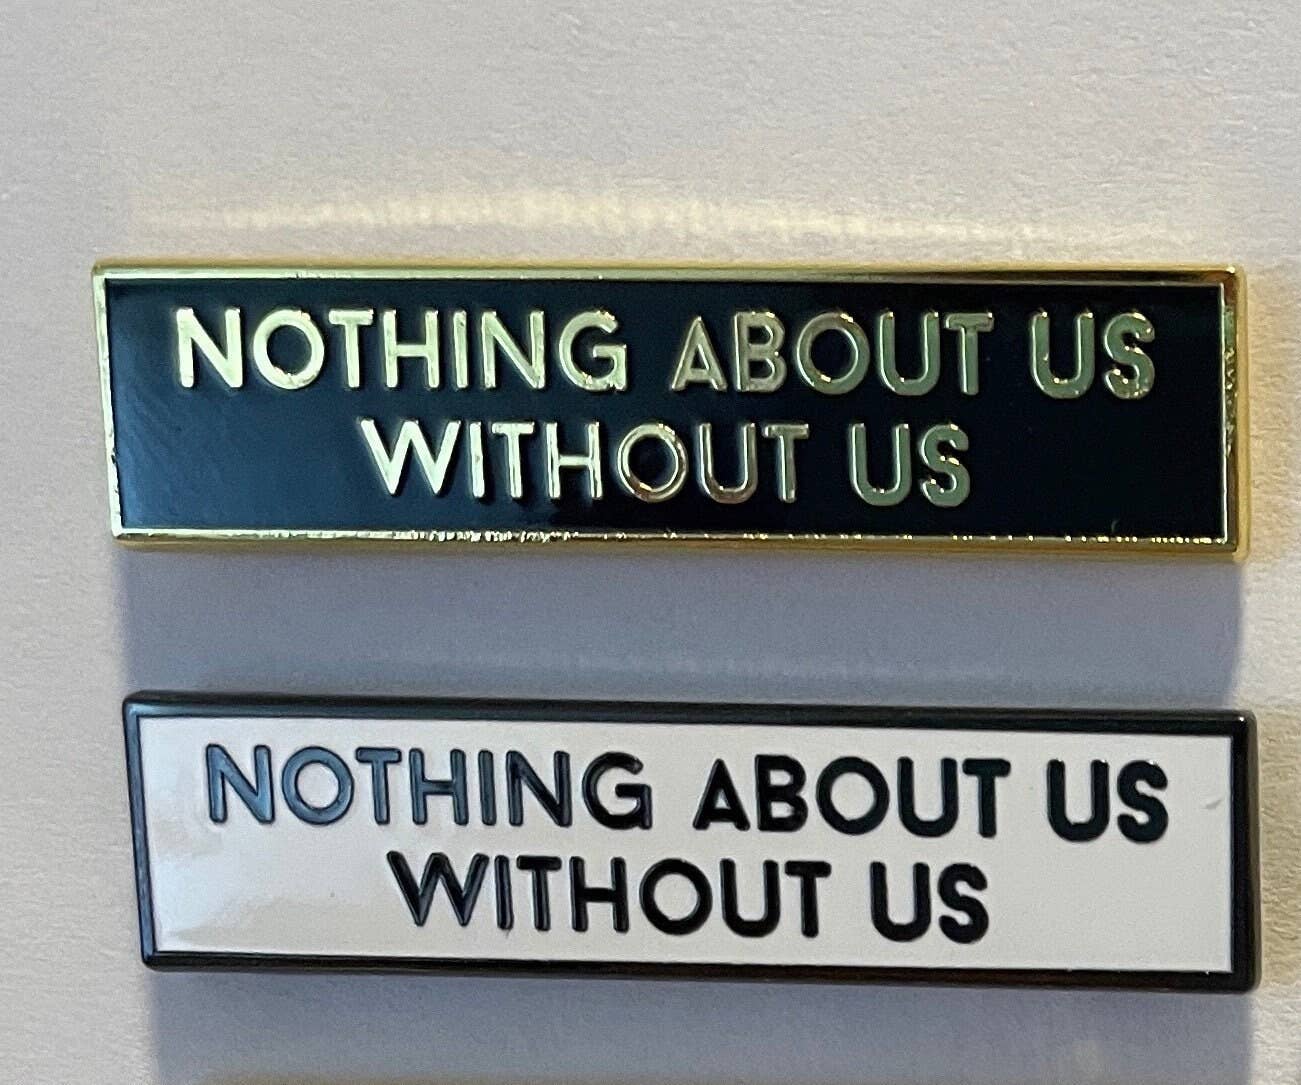 "Nothing About Us Without Us" Enamel Disability Activism Pin - Black and White